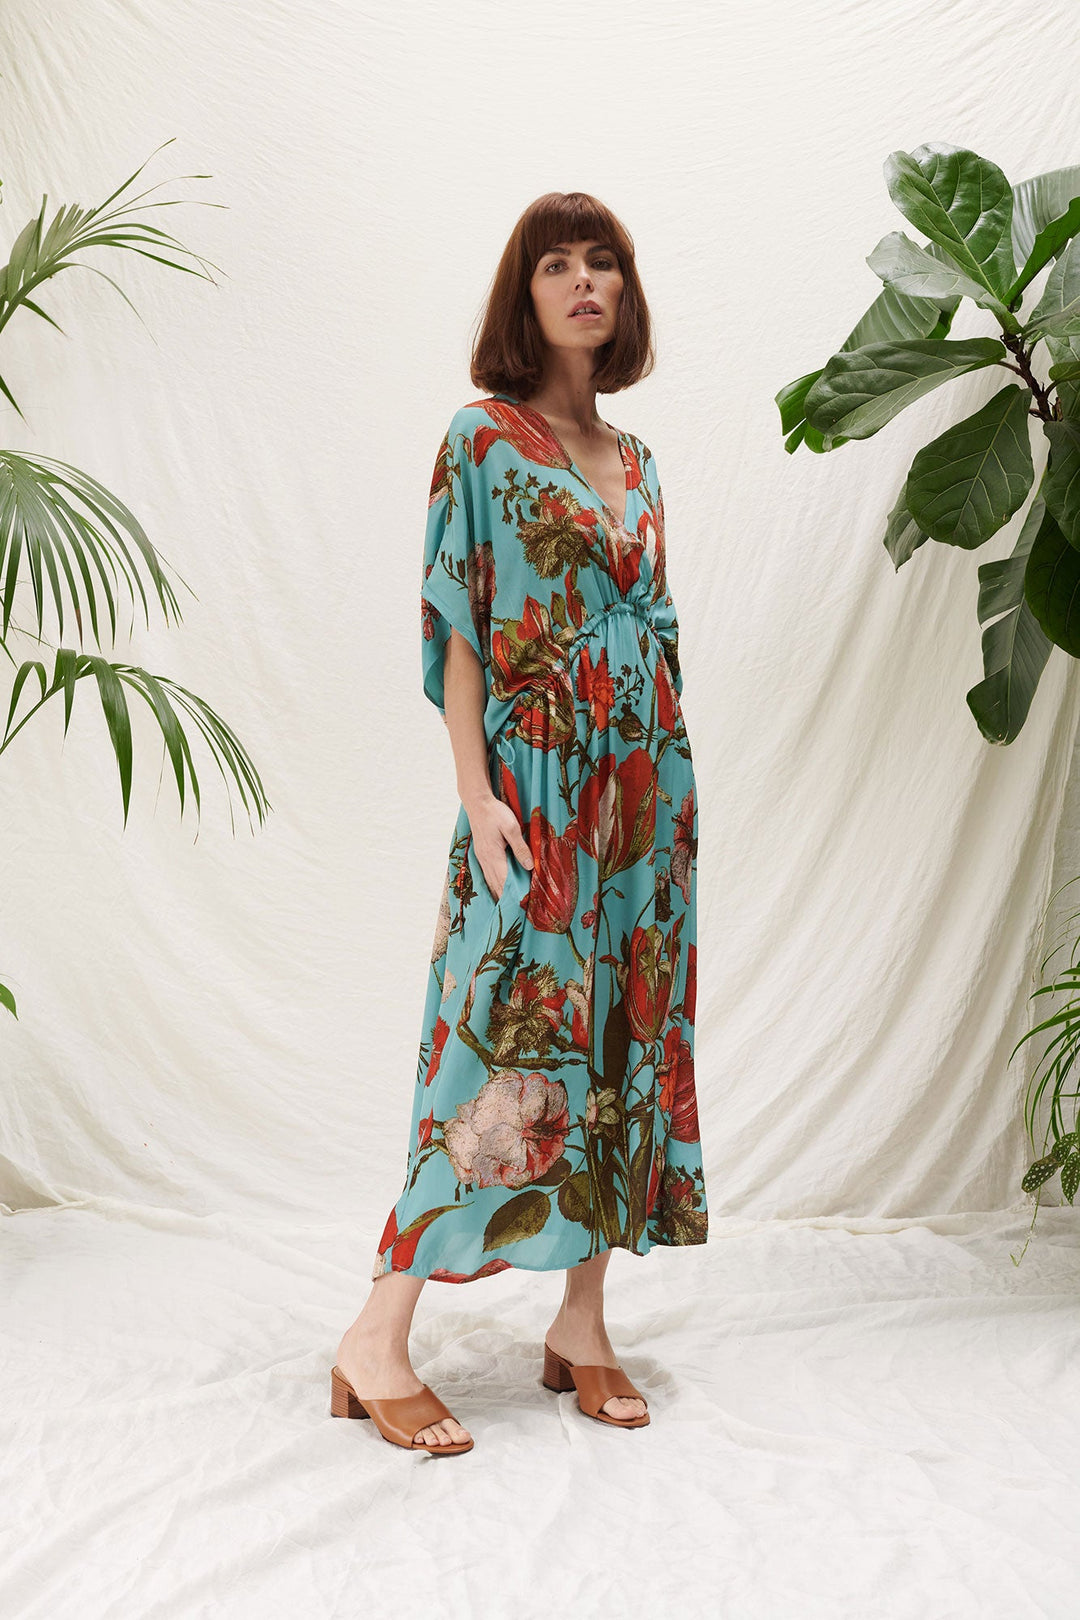 summer dress by one hundred stars featuring old master tulip print